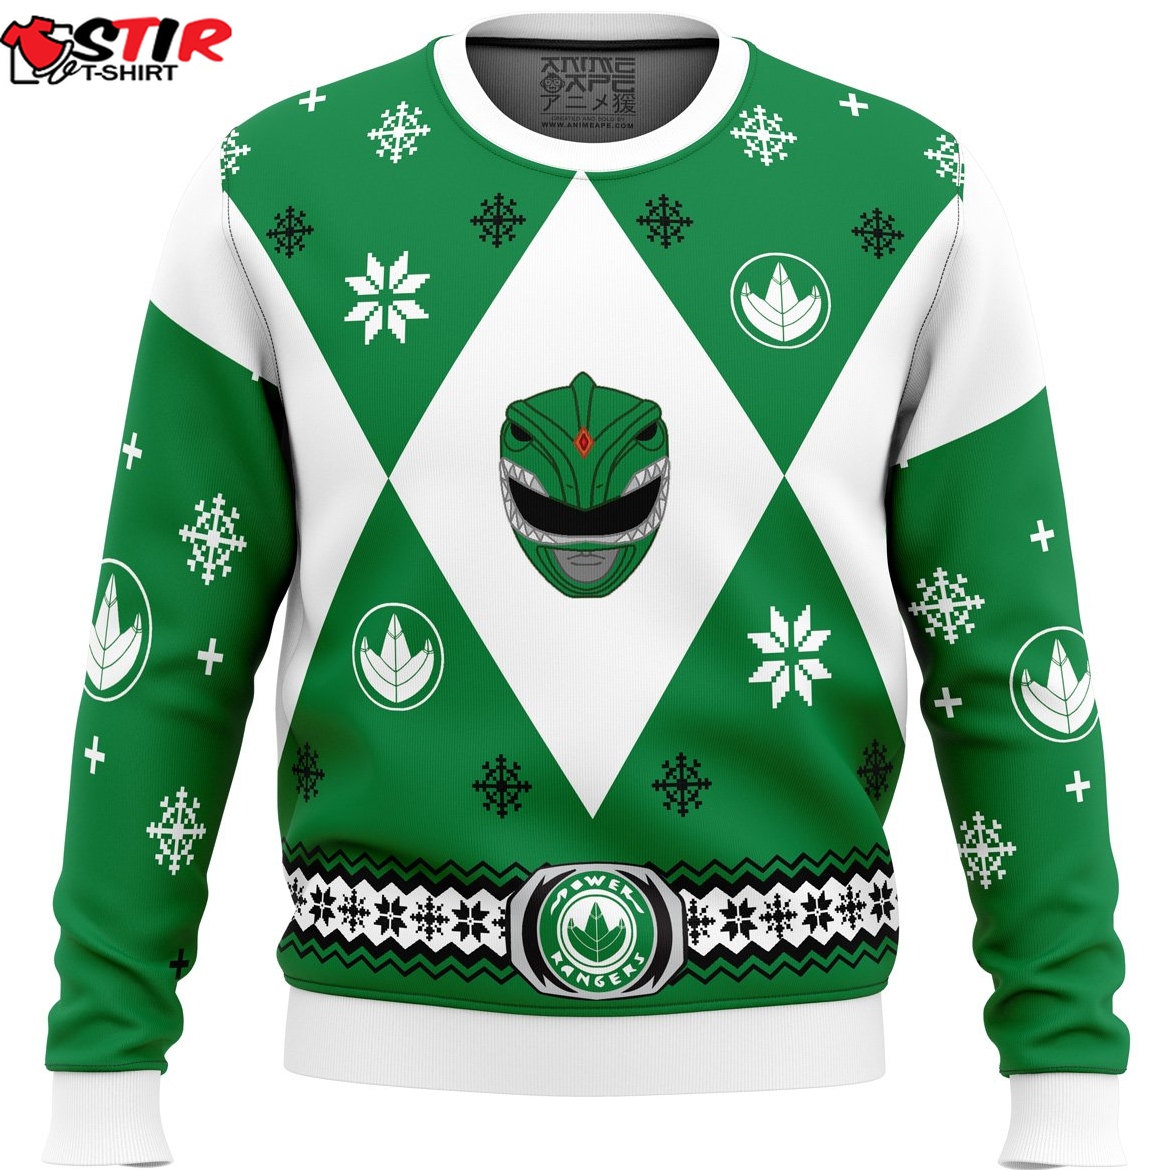 Mighty Morphin Power Rangers Green Ugly Christmas Sweater Stirtshirt